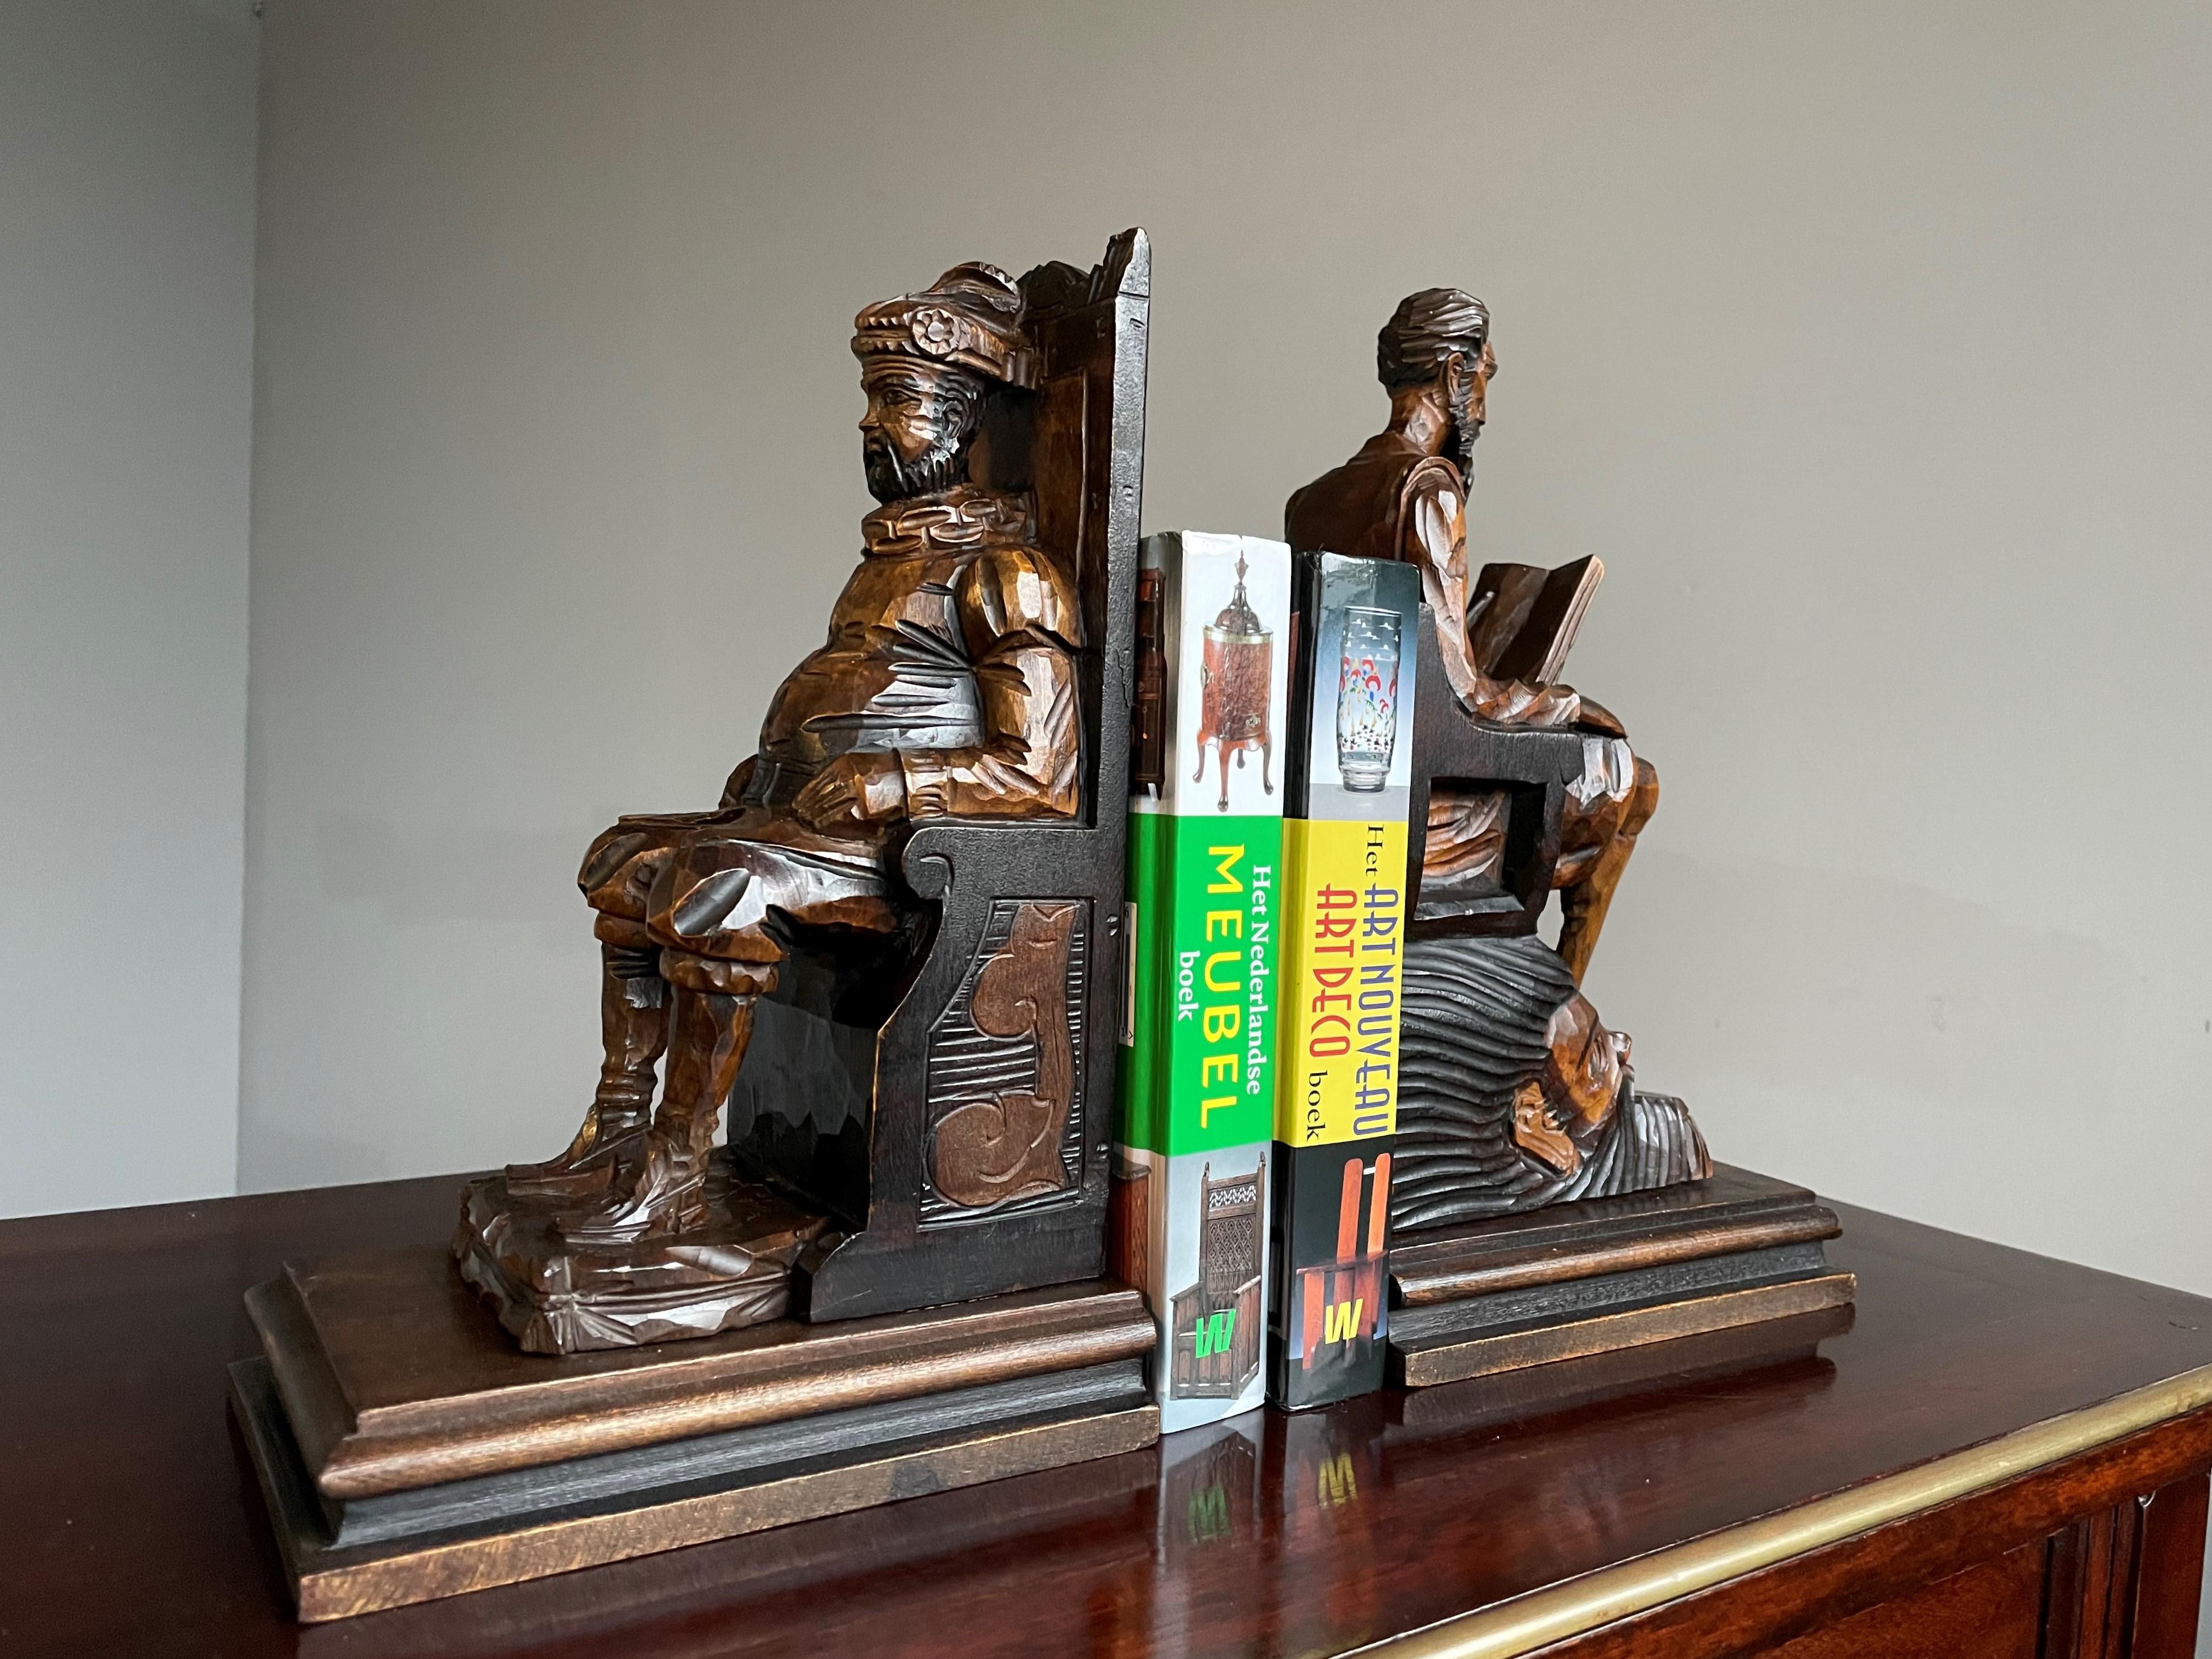 Near Antique Hand Carved Wooden Don Quixote and Sancho Panza Sculpture Bookends 4